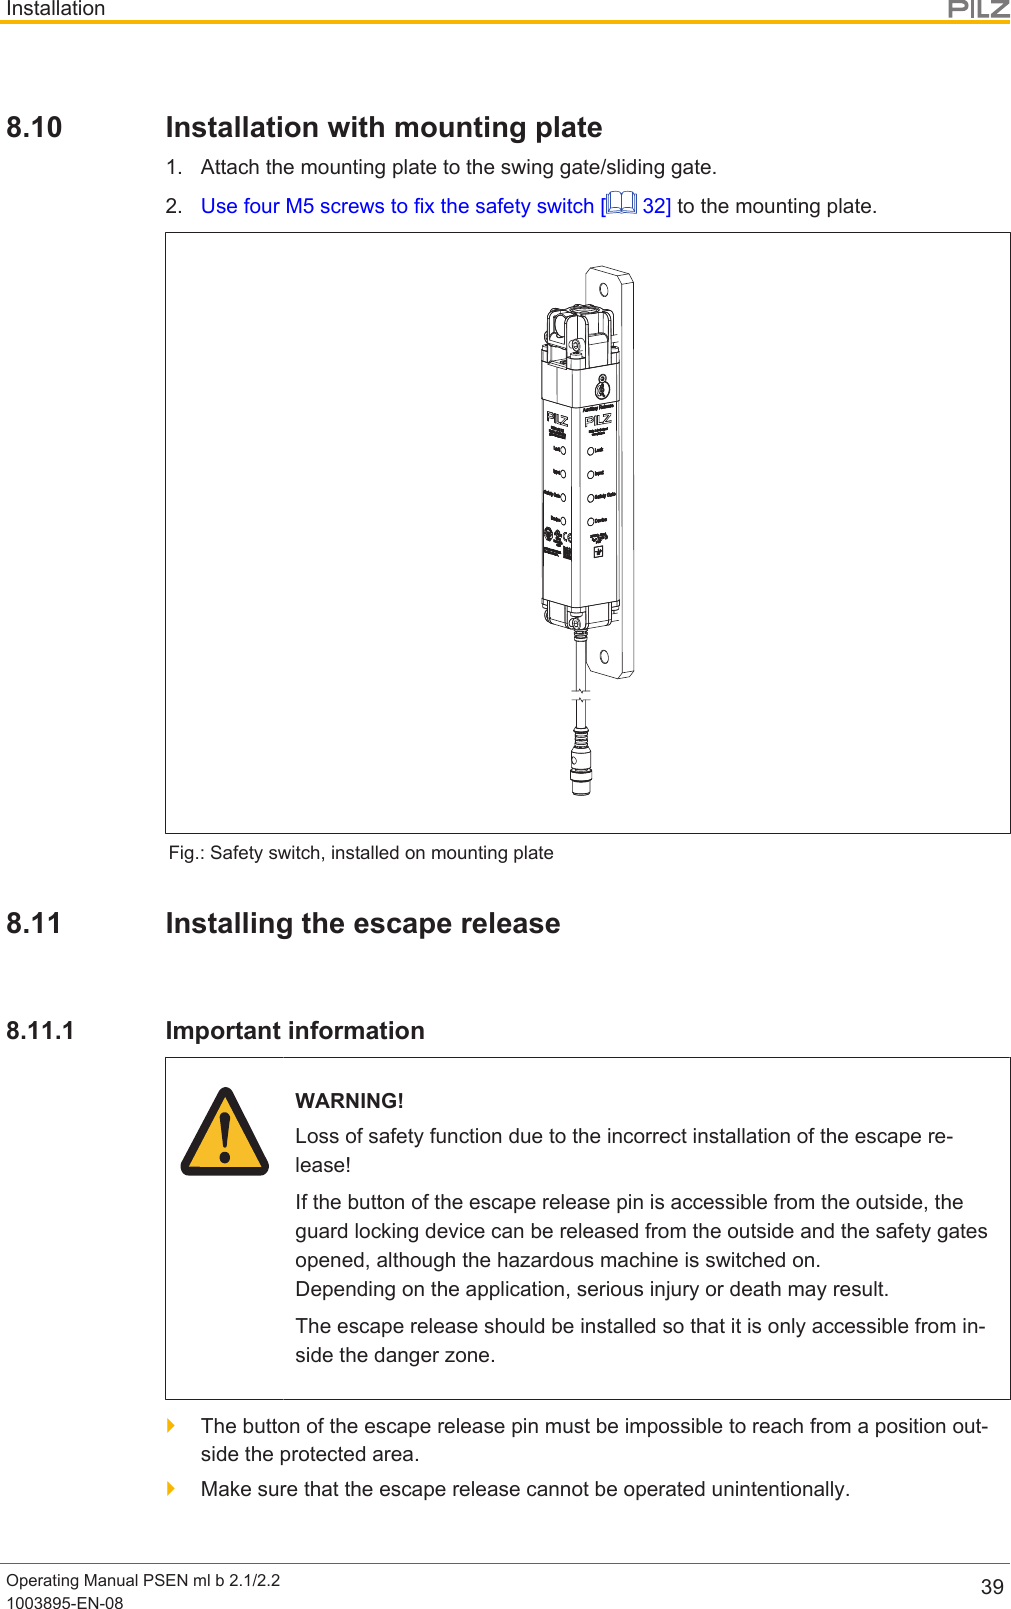 InstallationOperating Manual PSEN ml b 2.1/2.21003895-EN-08 398.10 Installation with mounting plate1. Attach the mounting plate to the swing gate/sliding gate.2. Use four M5 screws to fix the safety switch [  32] to the mounting plate.Fig.: Safety switch, installed on mounting plate8.11 Installing the escape release8.11.1 Important informationWARNING!Loss of safety function due to the incorrect installation of the escape re-lease!If the button of the escape release pin is accessible from the outside, theguard locking device can be released from the outside and the safety gatesopened, although the hazardous machine is switched on. Depending on the application, serious injury or death may result.The escape release should be installed so that it is only accessible from in-side the danger zone.}The button of the escape release pin must be impossible to reach from a position out-side the protected area.}Make sure that the escape release cannot be operated unintentionally.